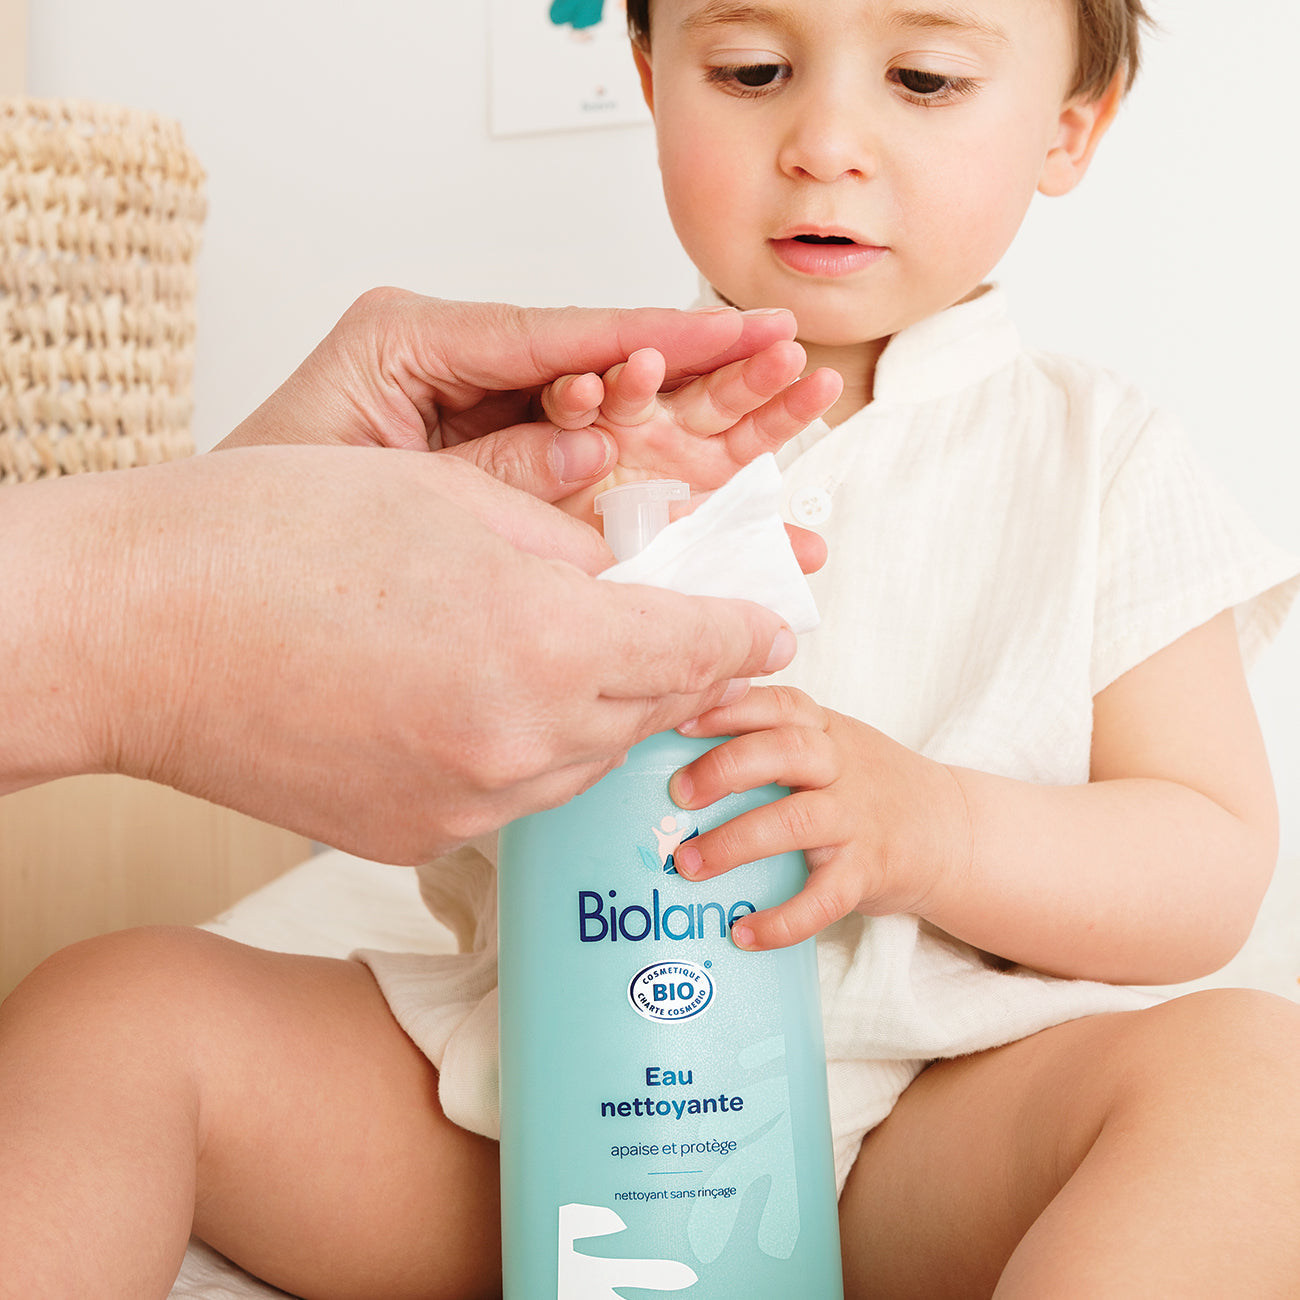 Get trendy with Eau nettoyante Certifiée biologique - Gel nettoyant available at BABY PREMA. Grab yours for €7.50 today!